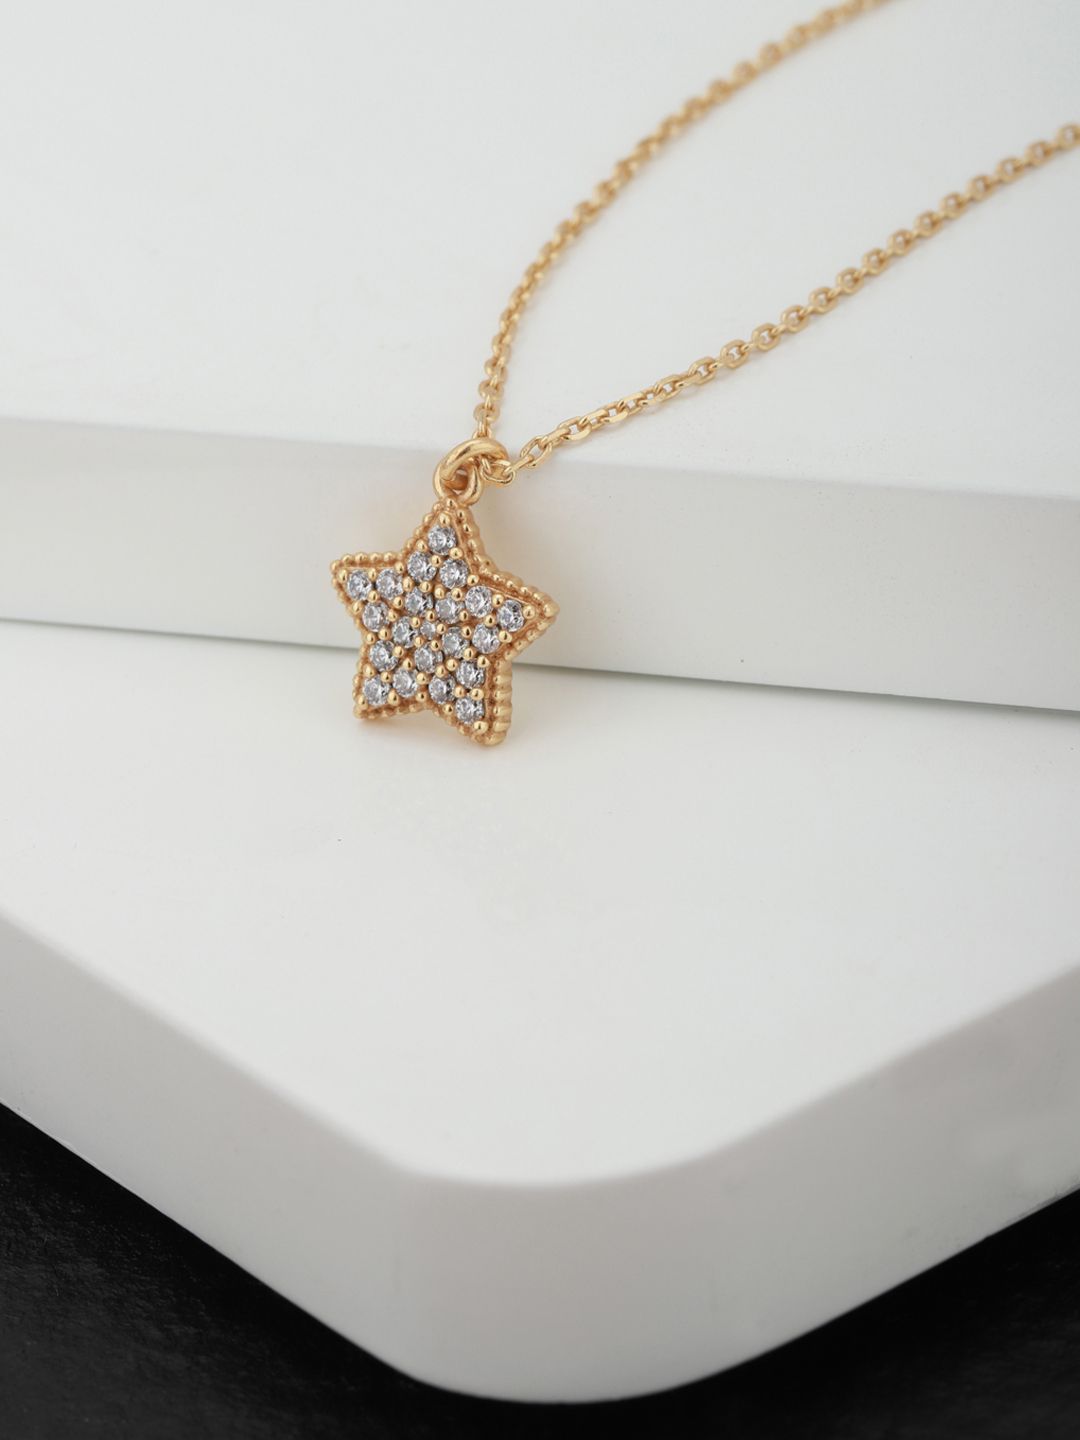 Carlton London Gold-Plated CZ-Studded Star-Shaped Necklace Price in India